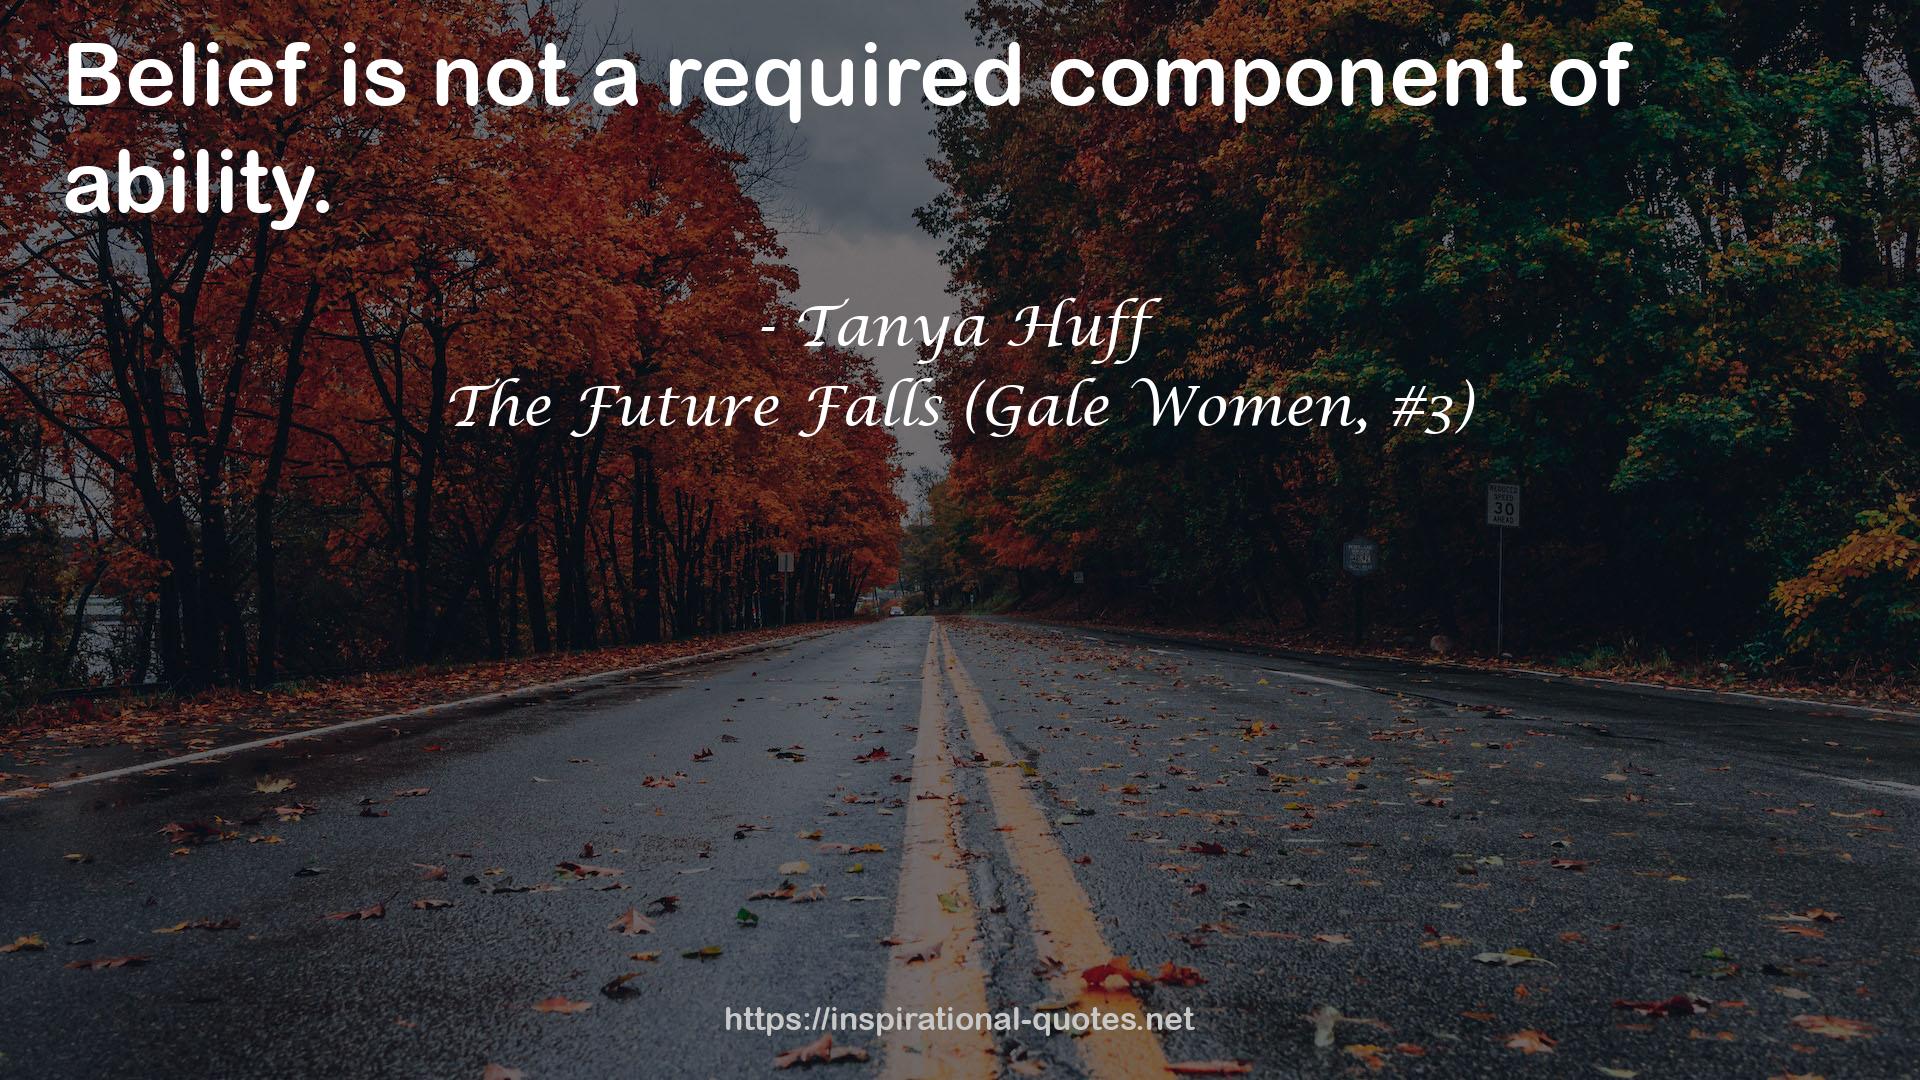 The Future Falls (Gale Women, #3) QUOTES